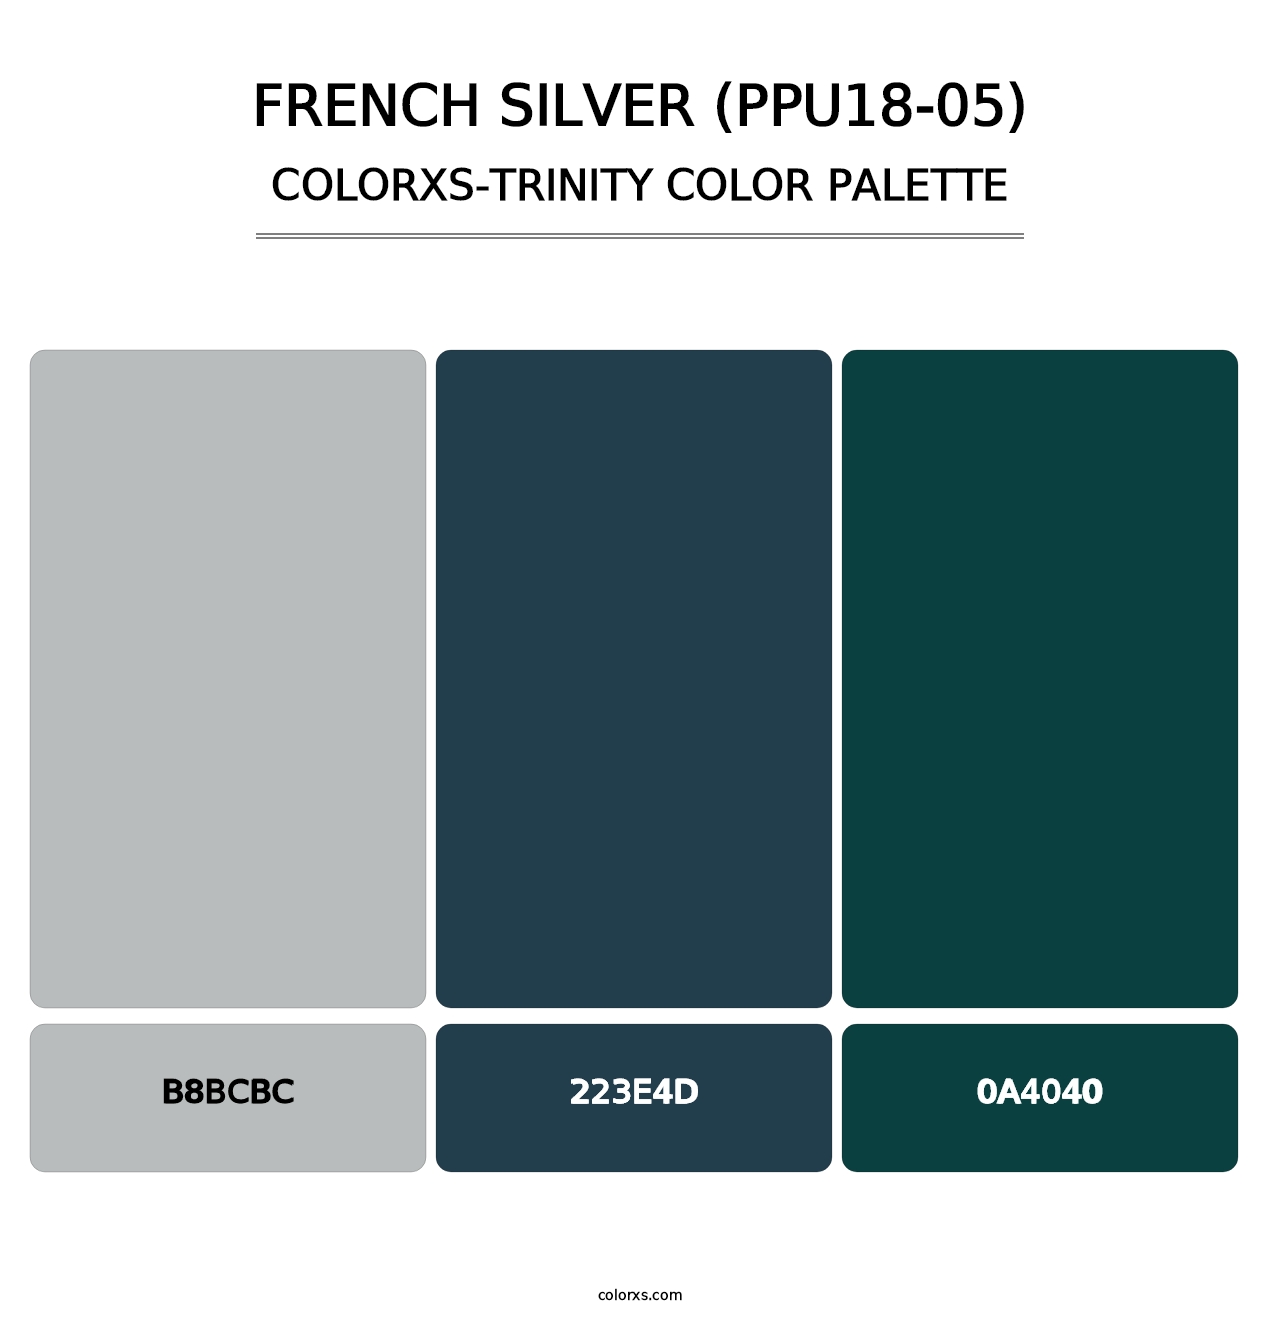 French Silver (PPU18-05) - Colorxs Trinity Palette